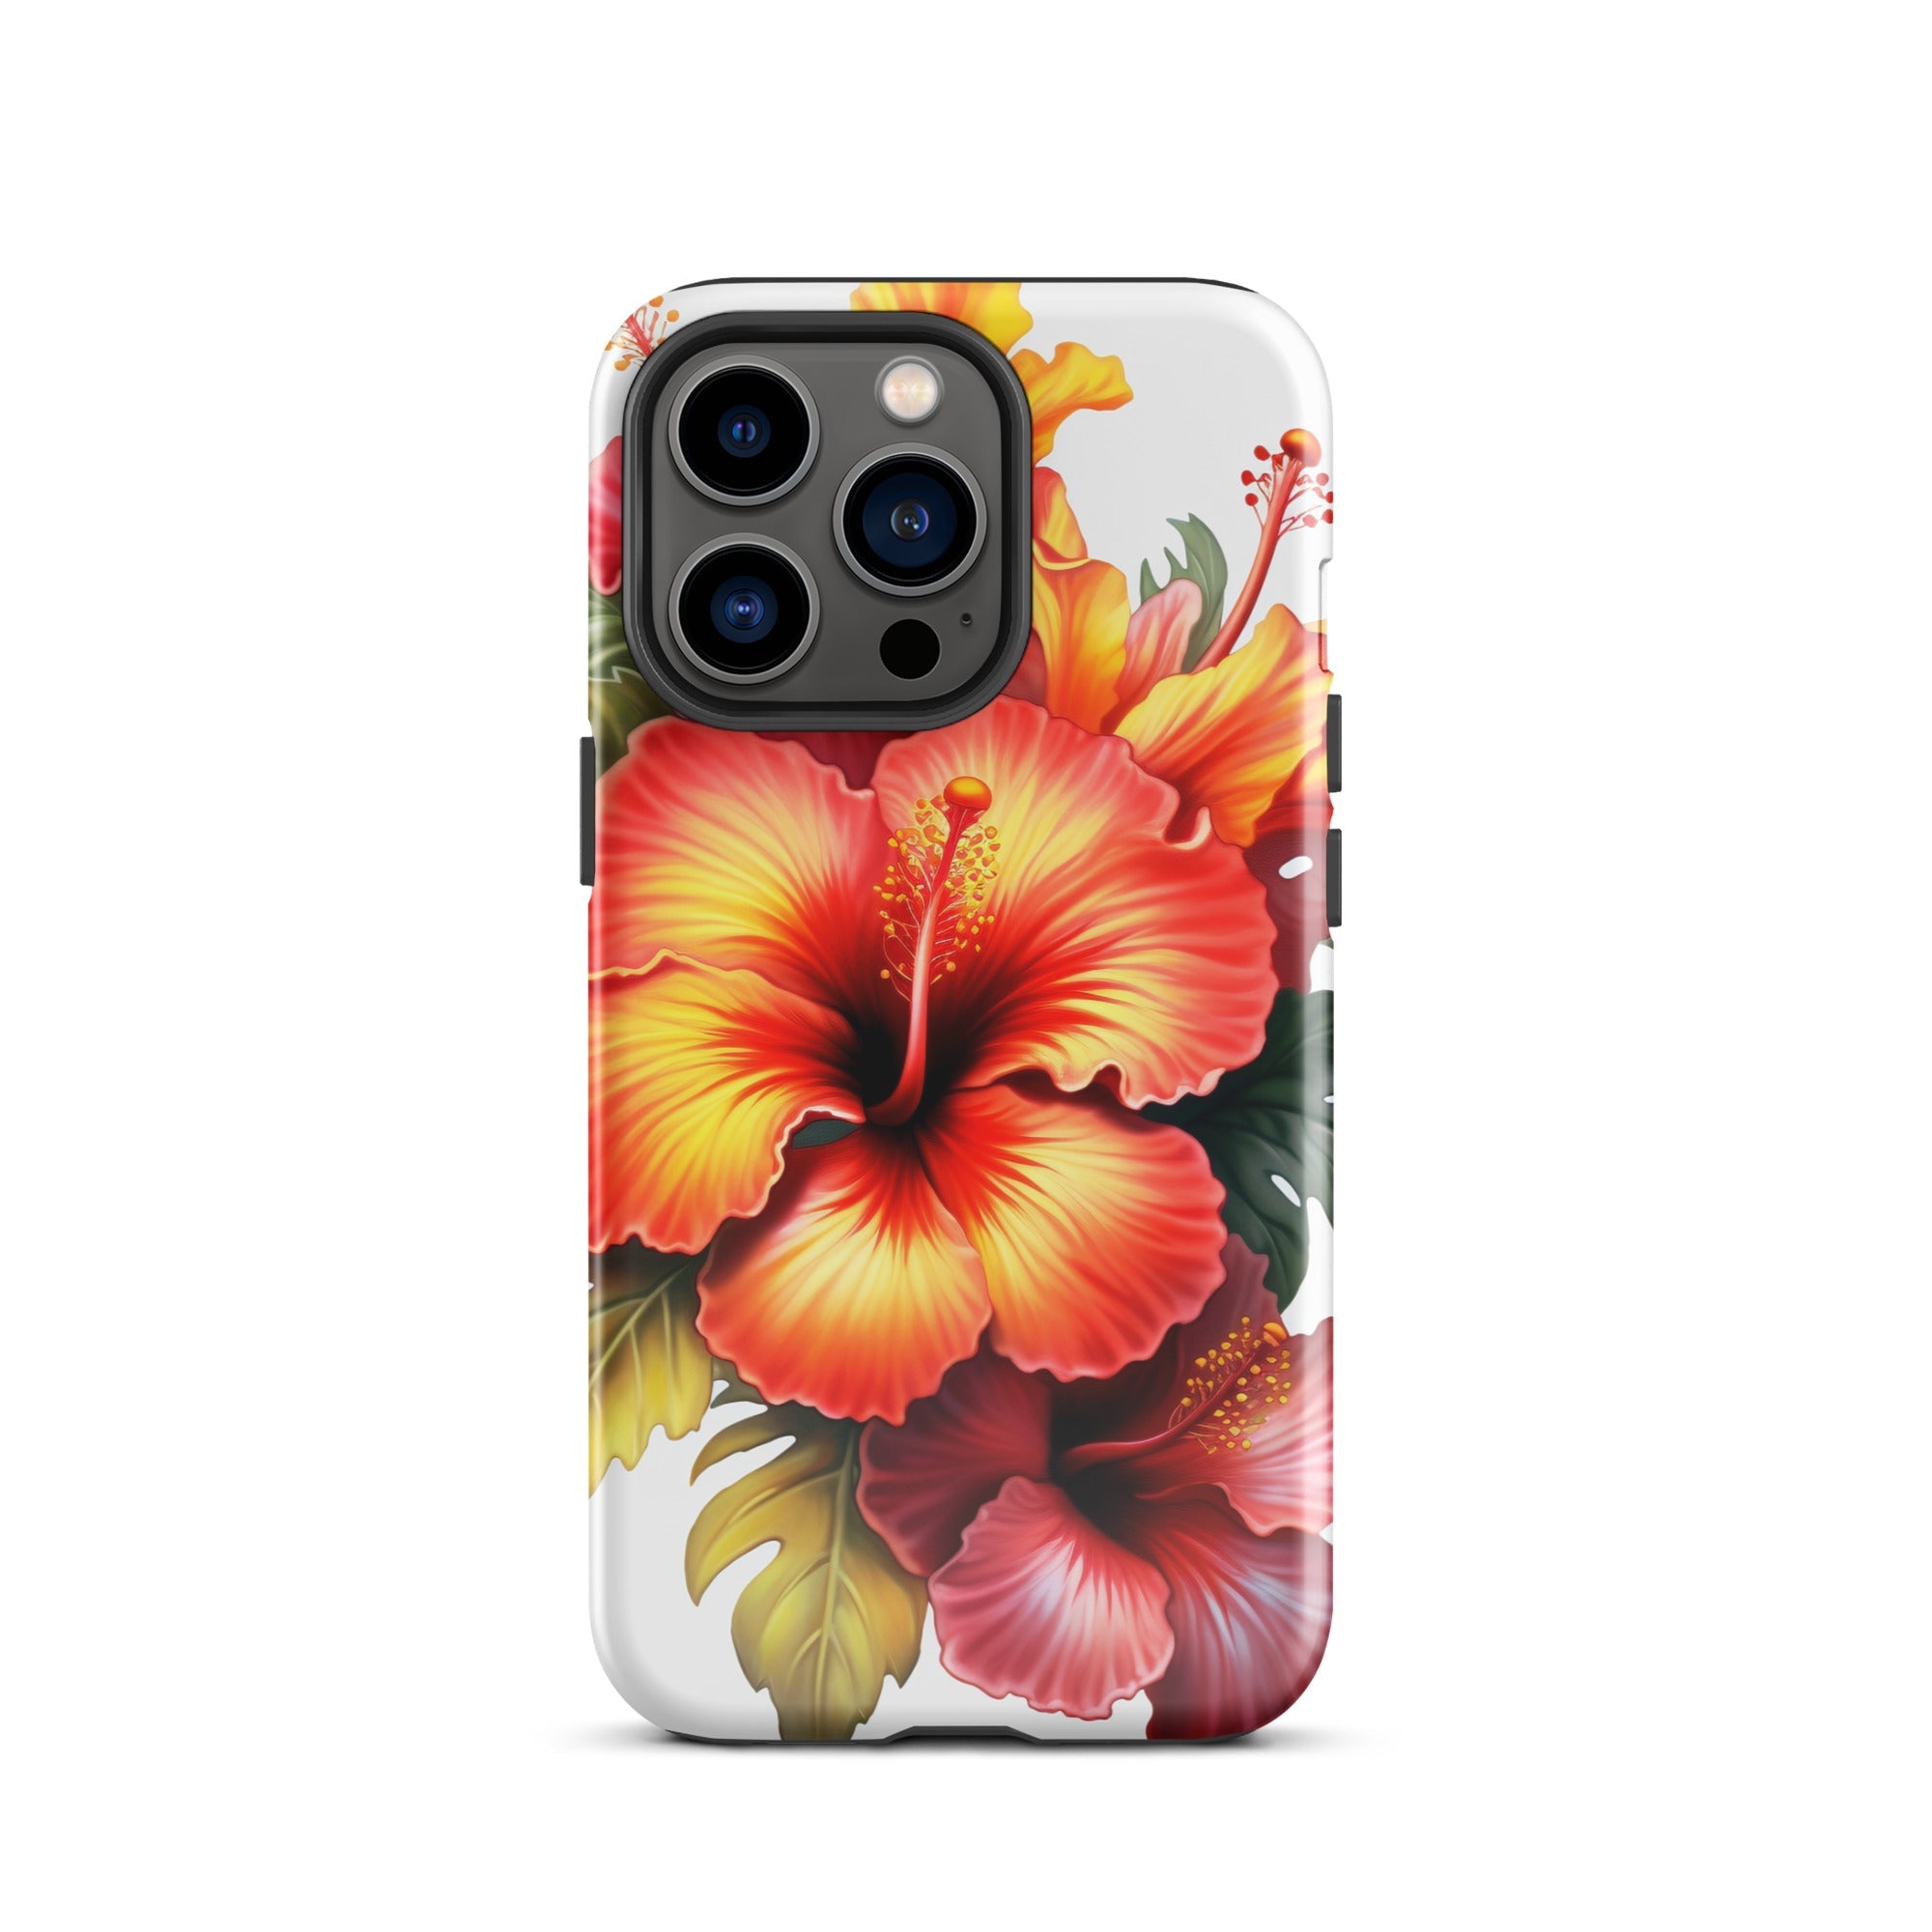 Hibiscus Flower iPhone Case by Visual Verse - Image 19